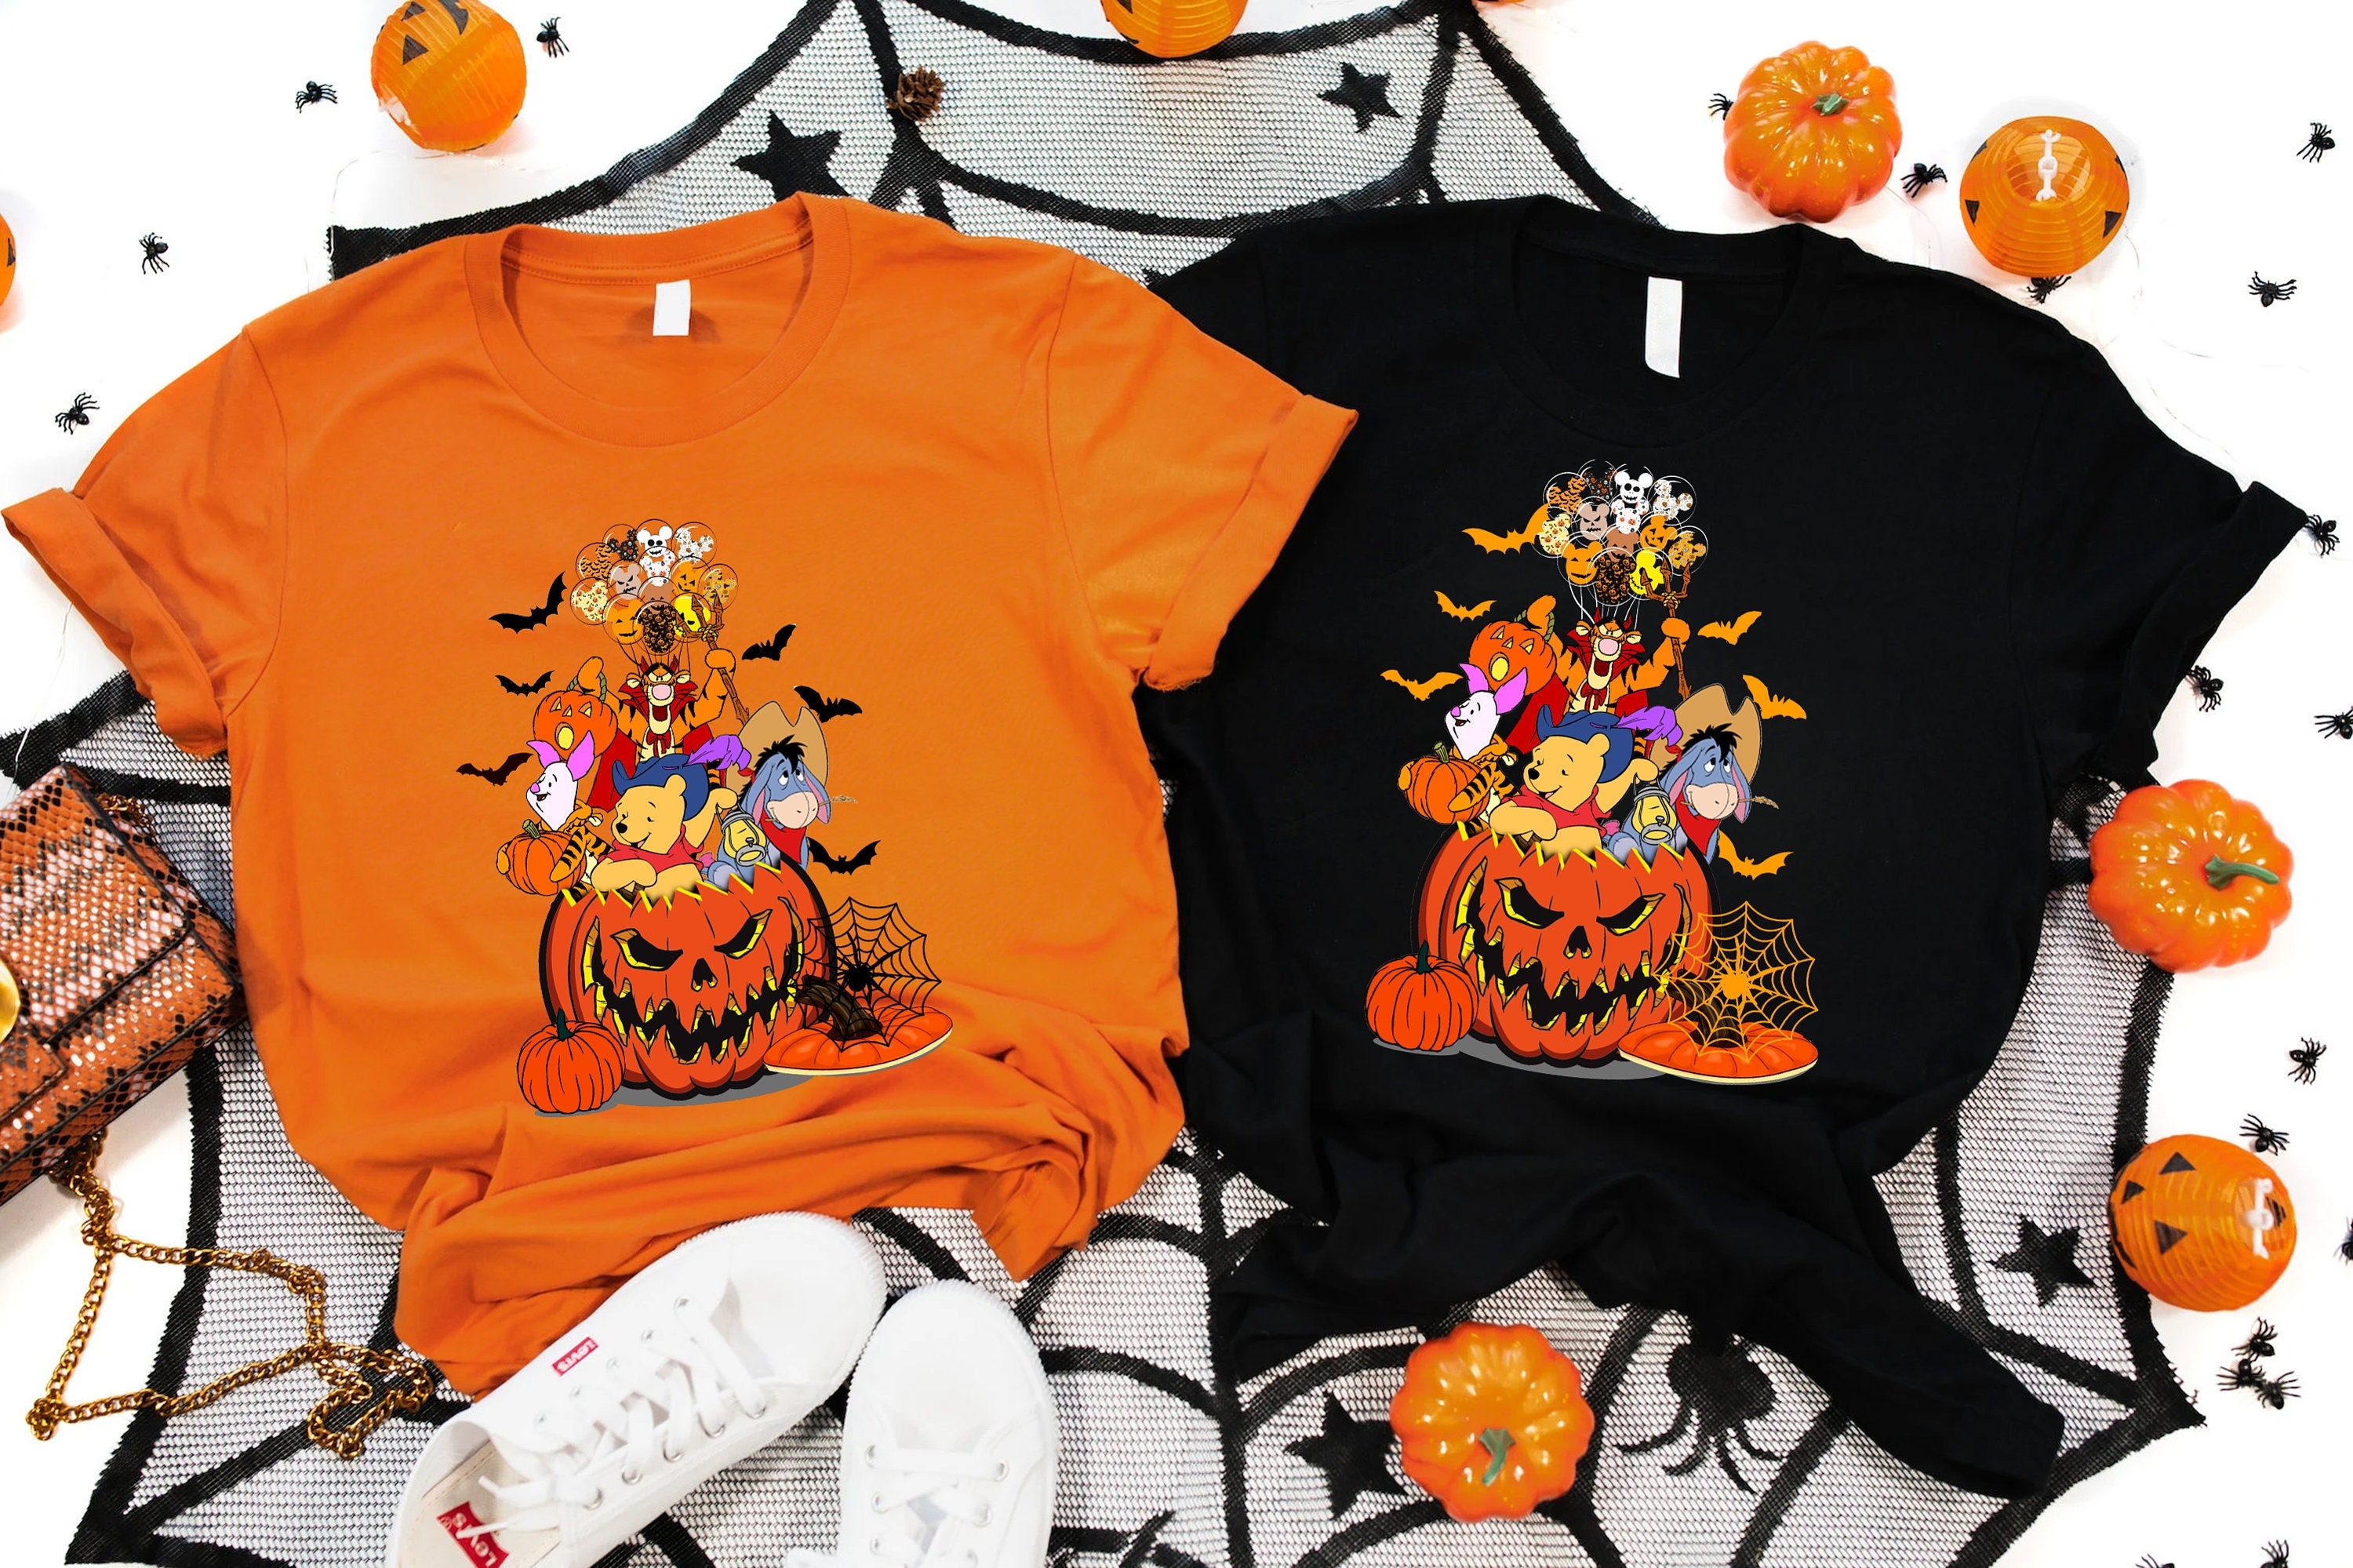 Discover Camiseta Winnie The Pooh Halloween 2022 Vintage para Hombre Mujer